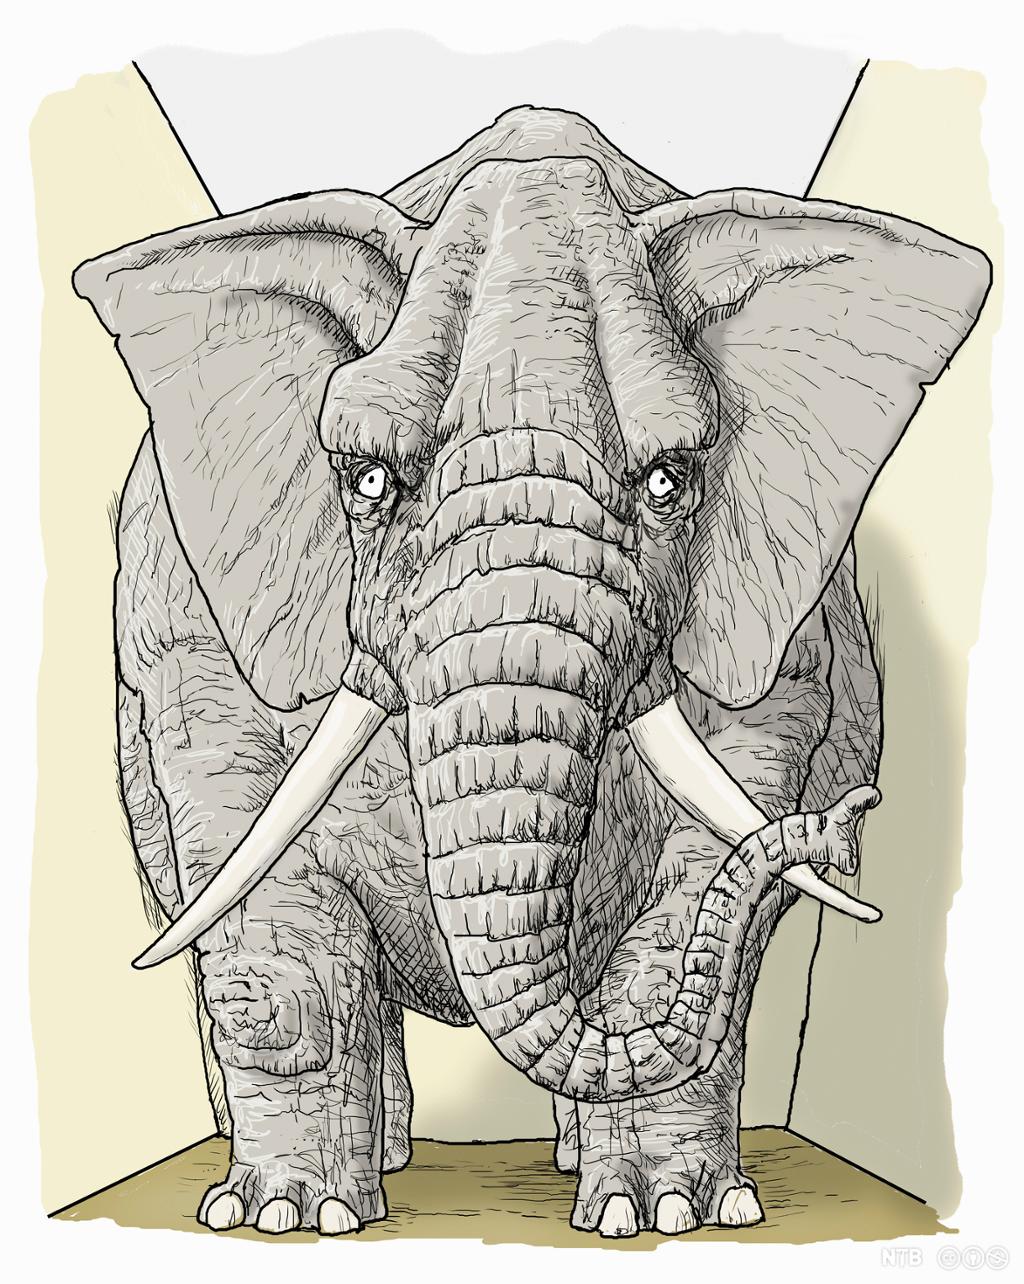 A large elephant in small room. Illustration.